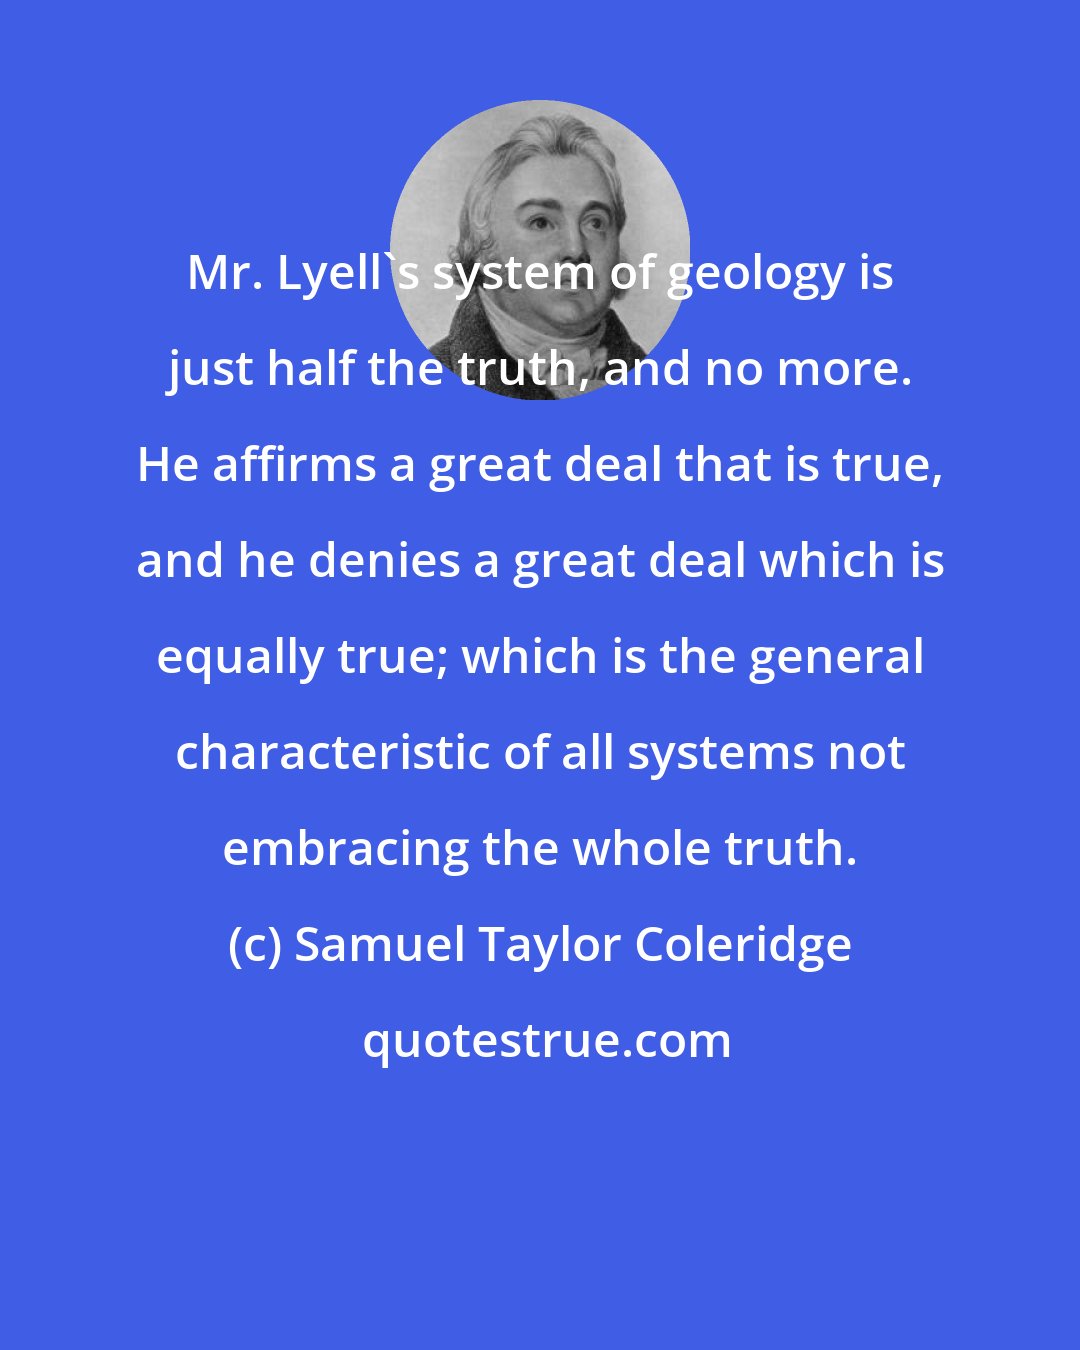 Samuel Taylor Coleridge: Mr. Lyell's system of geology is just half the truth, and no more. He affirms a great deal that is true, and he denies a great deal which is equally true; which is the general characteristic of all systems not embracing the whole truth.